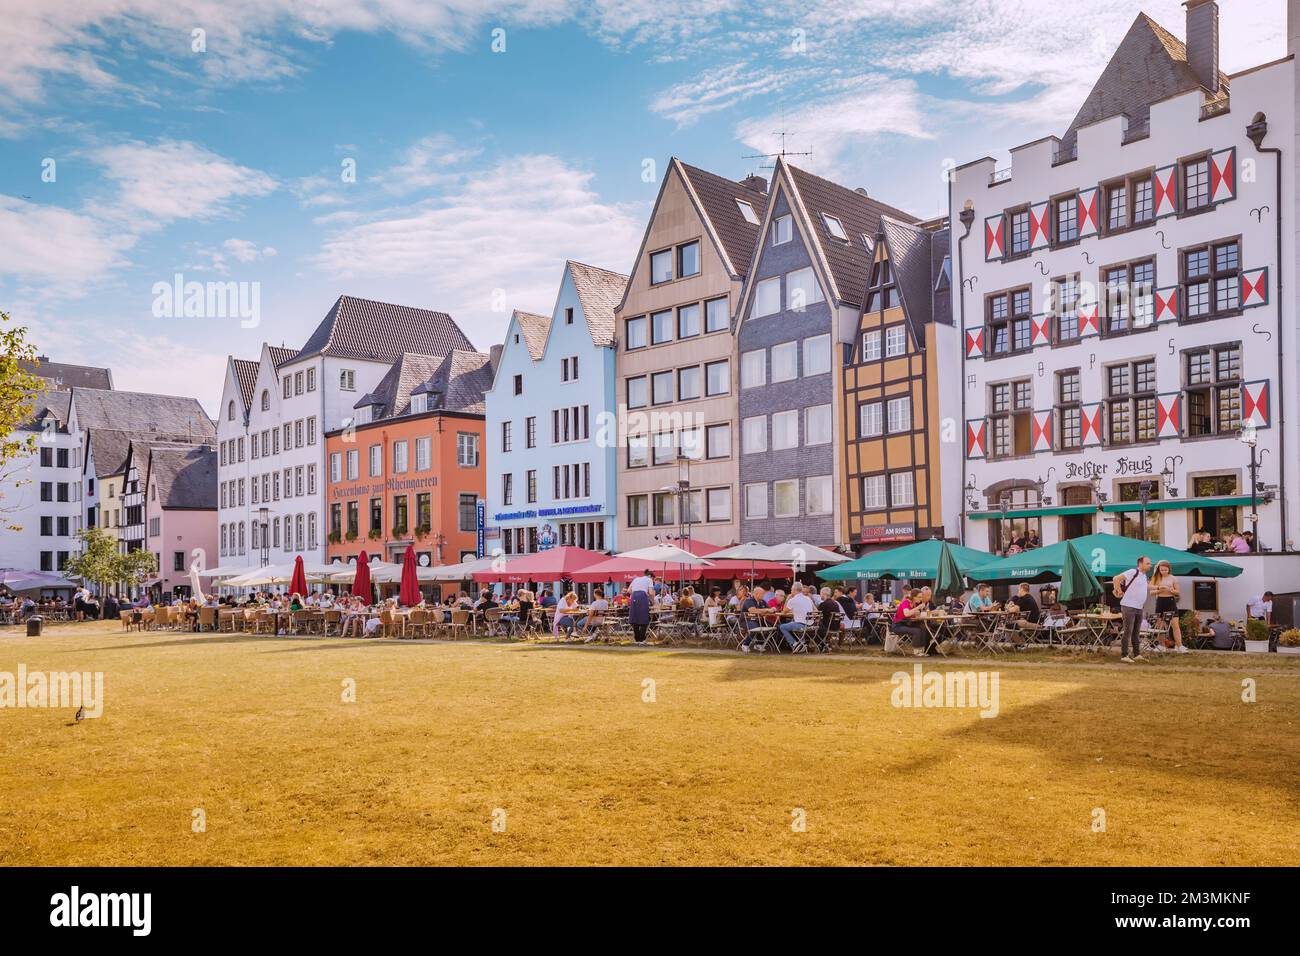 29 July 2022, Cologne, Germany: Fish market square with tourists resting in cafes, colorful houses in Koln. Travel and sightseeing Stock Photo